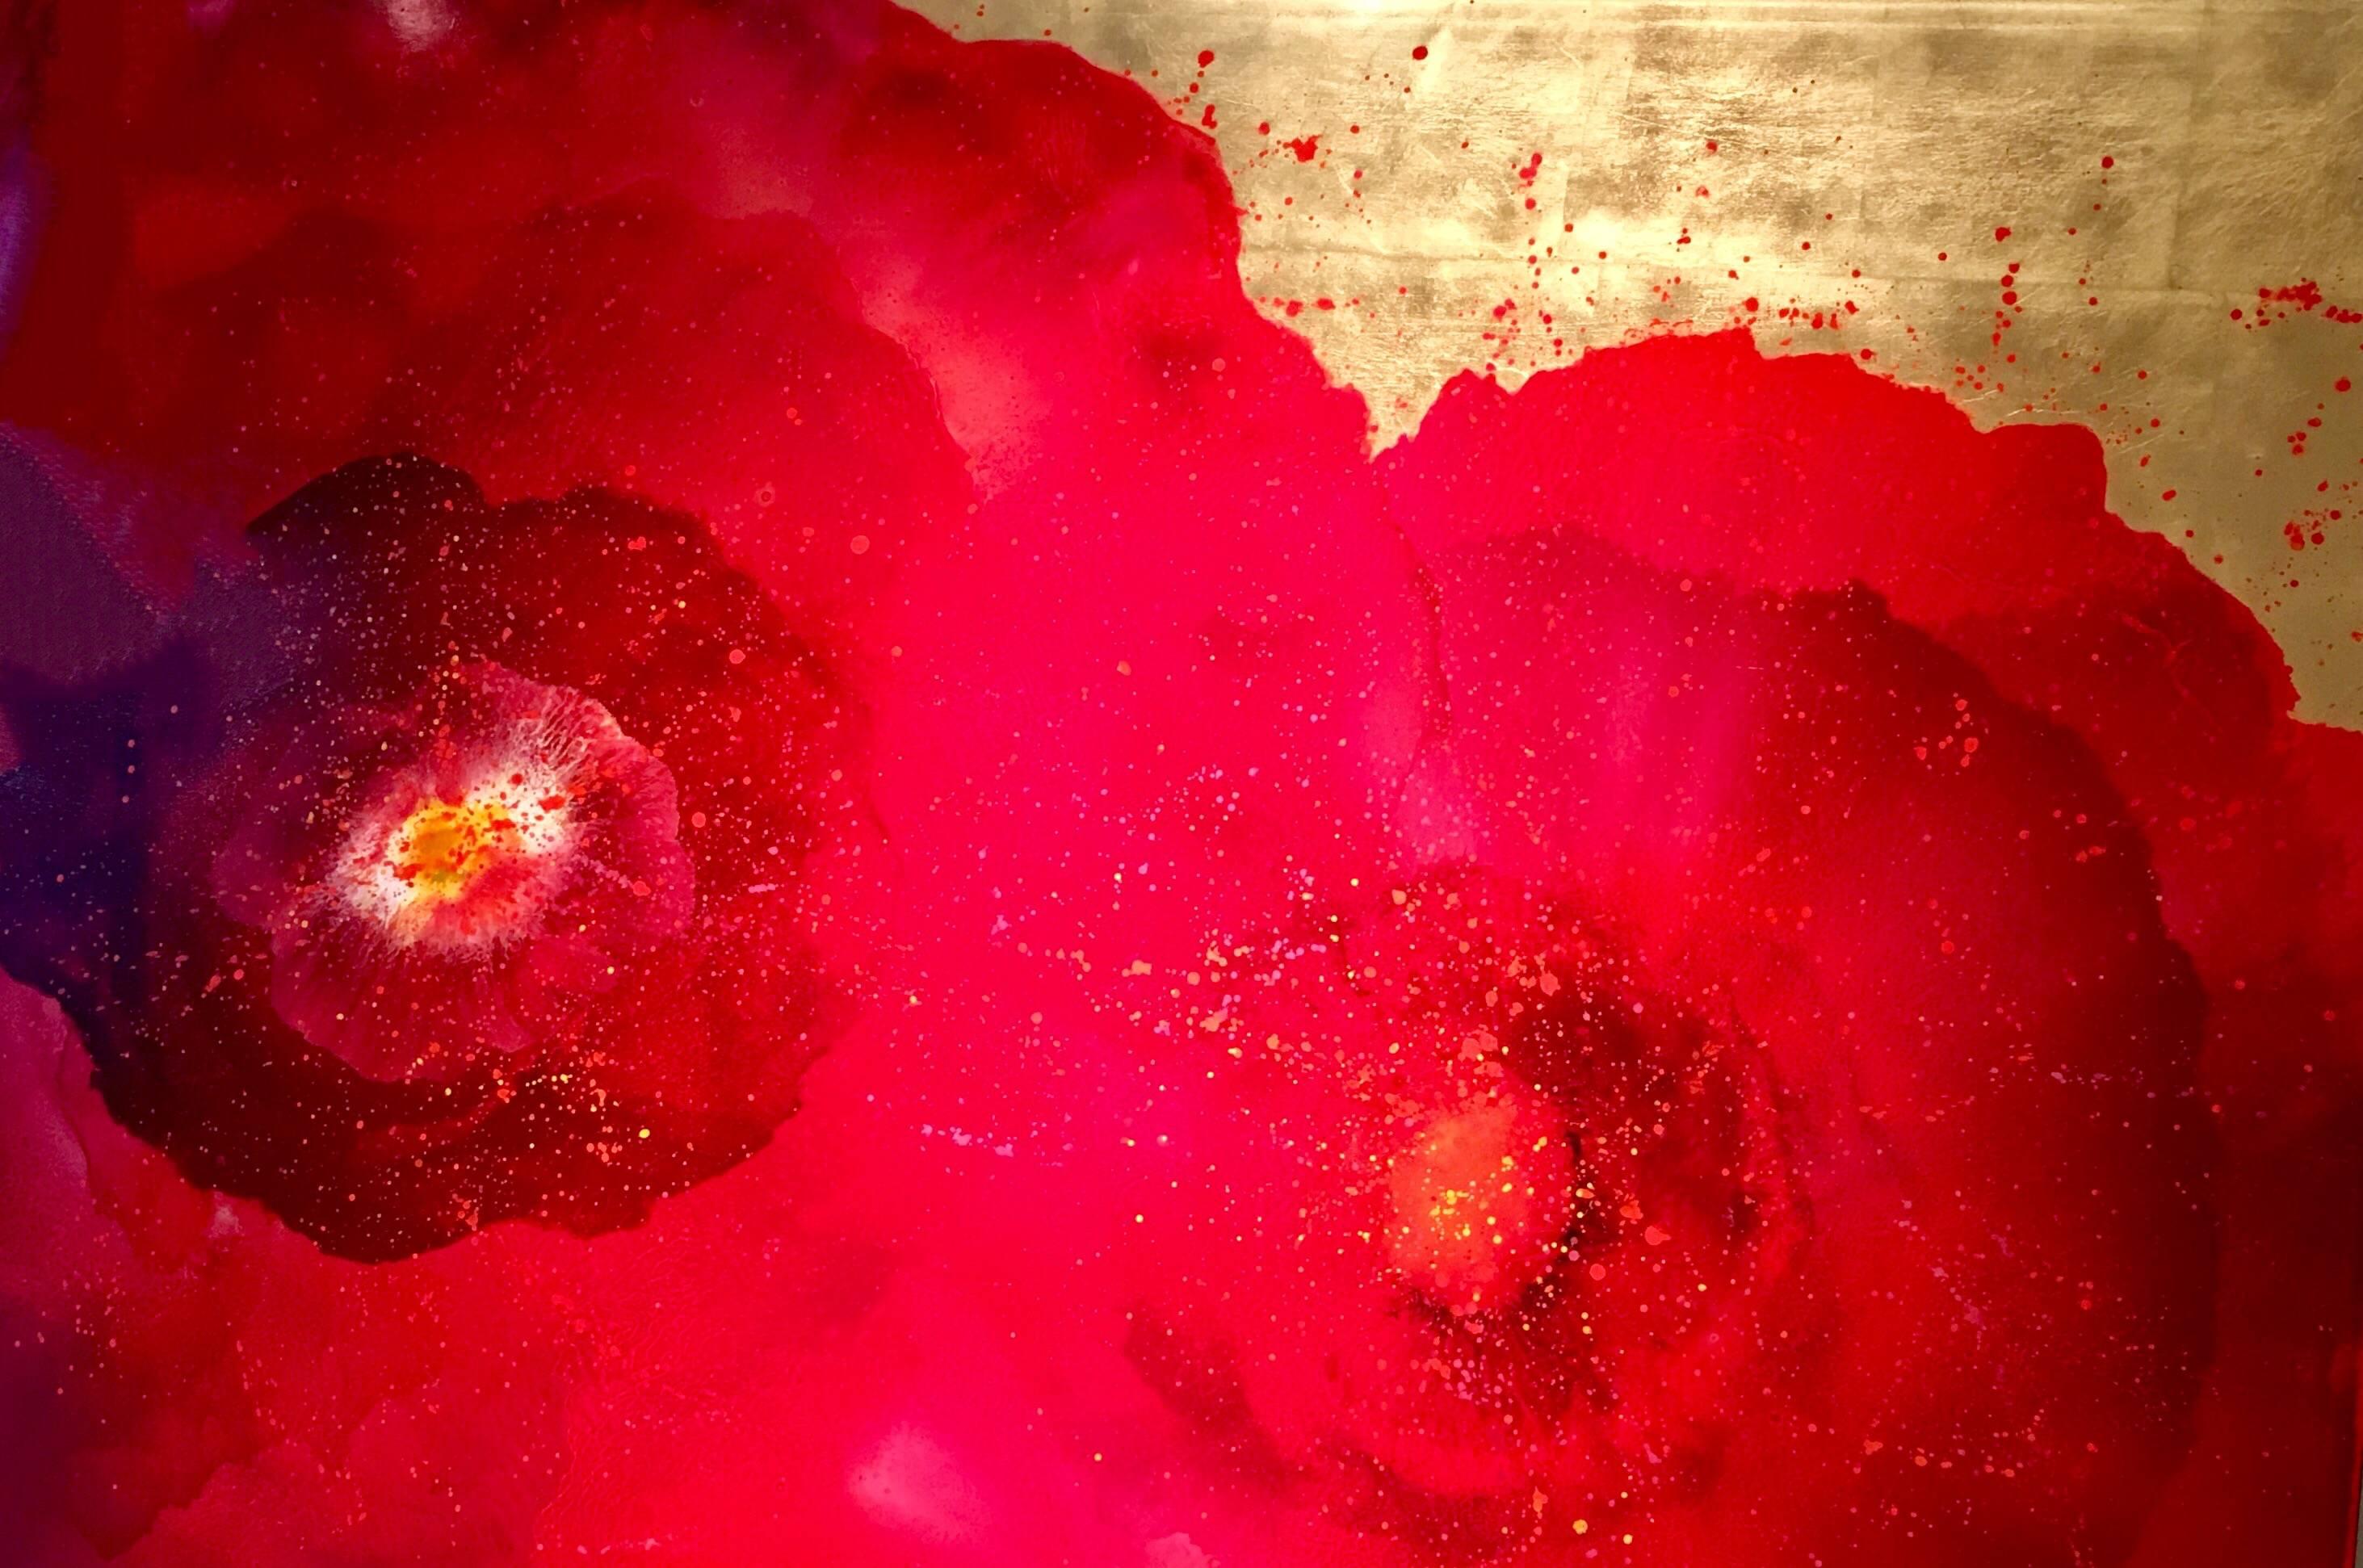 Carolyn Reynolds Abstract Painting - Red Bursts Over Gold I